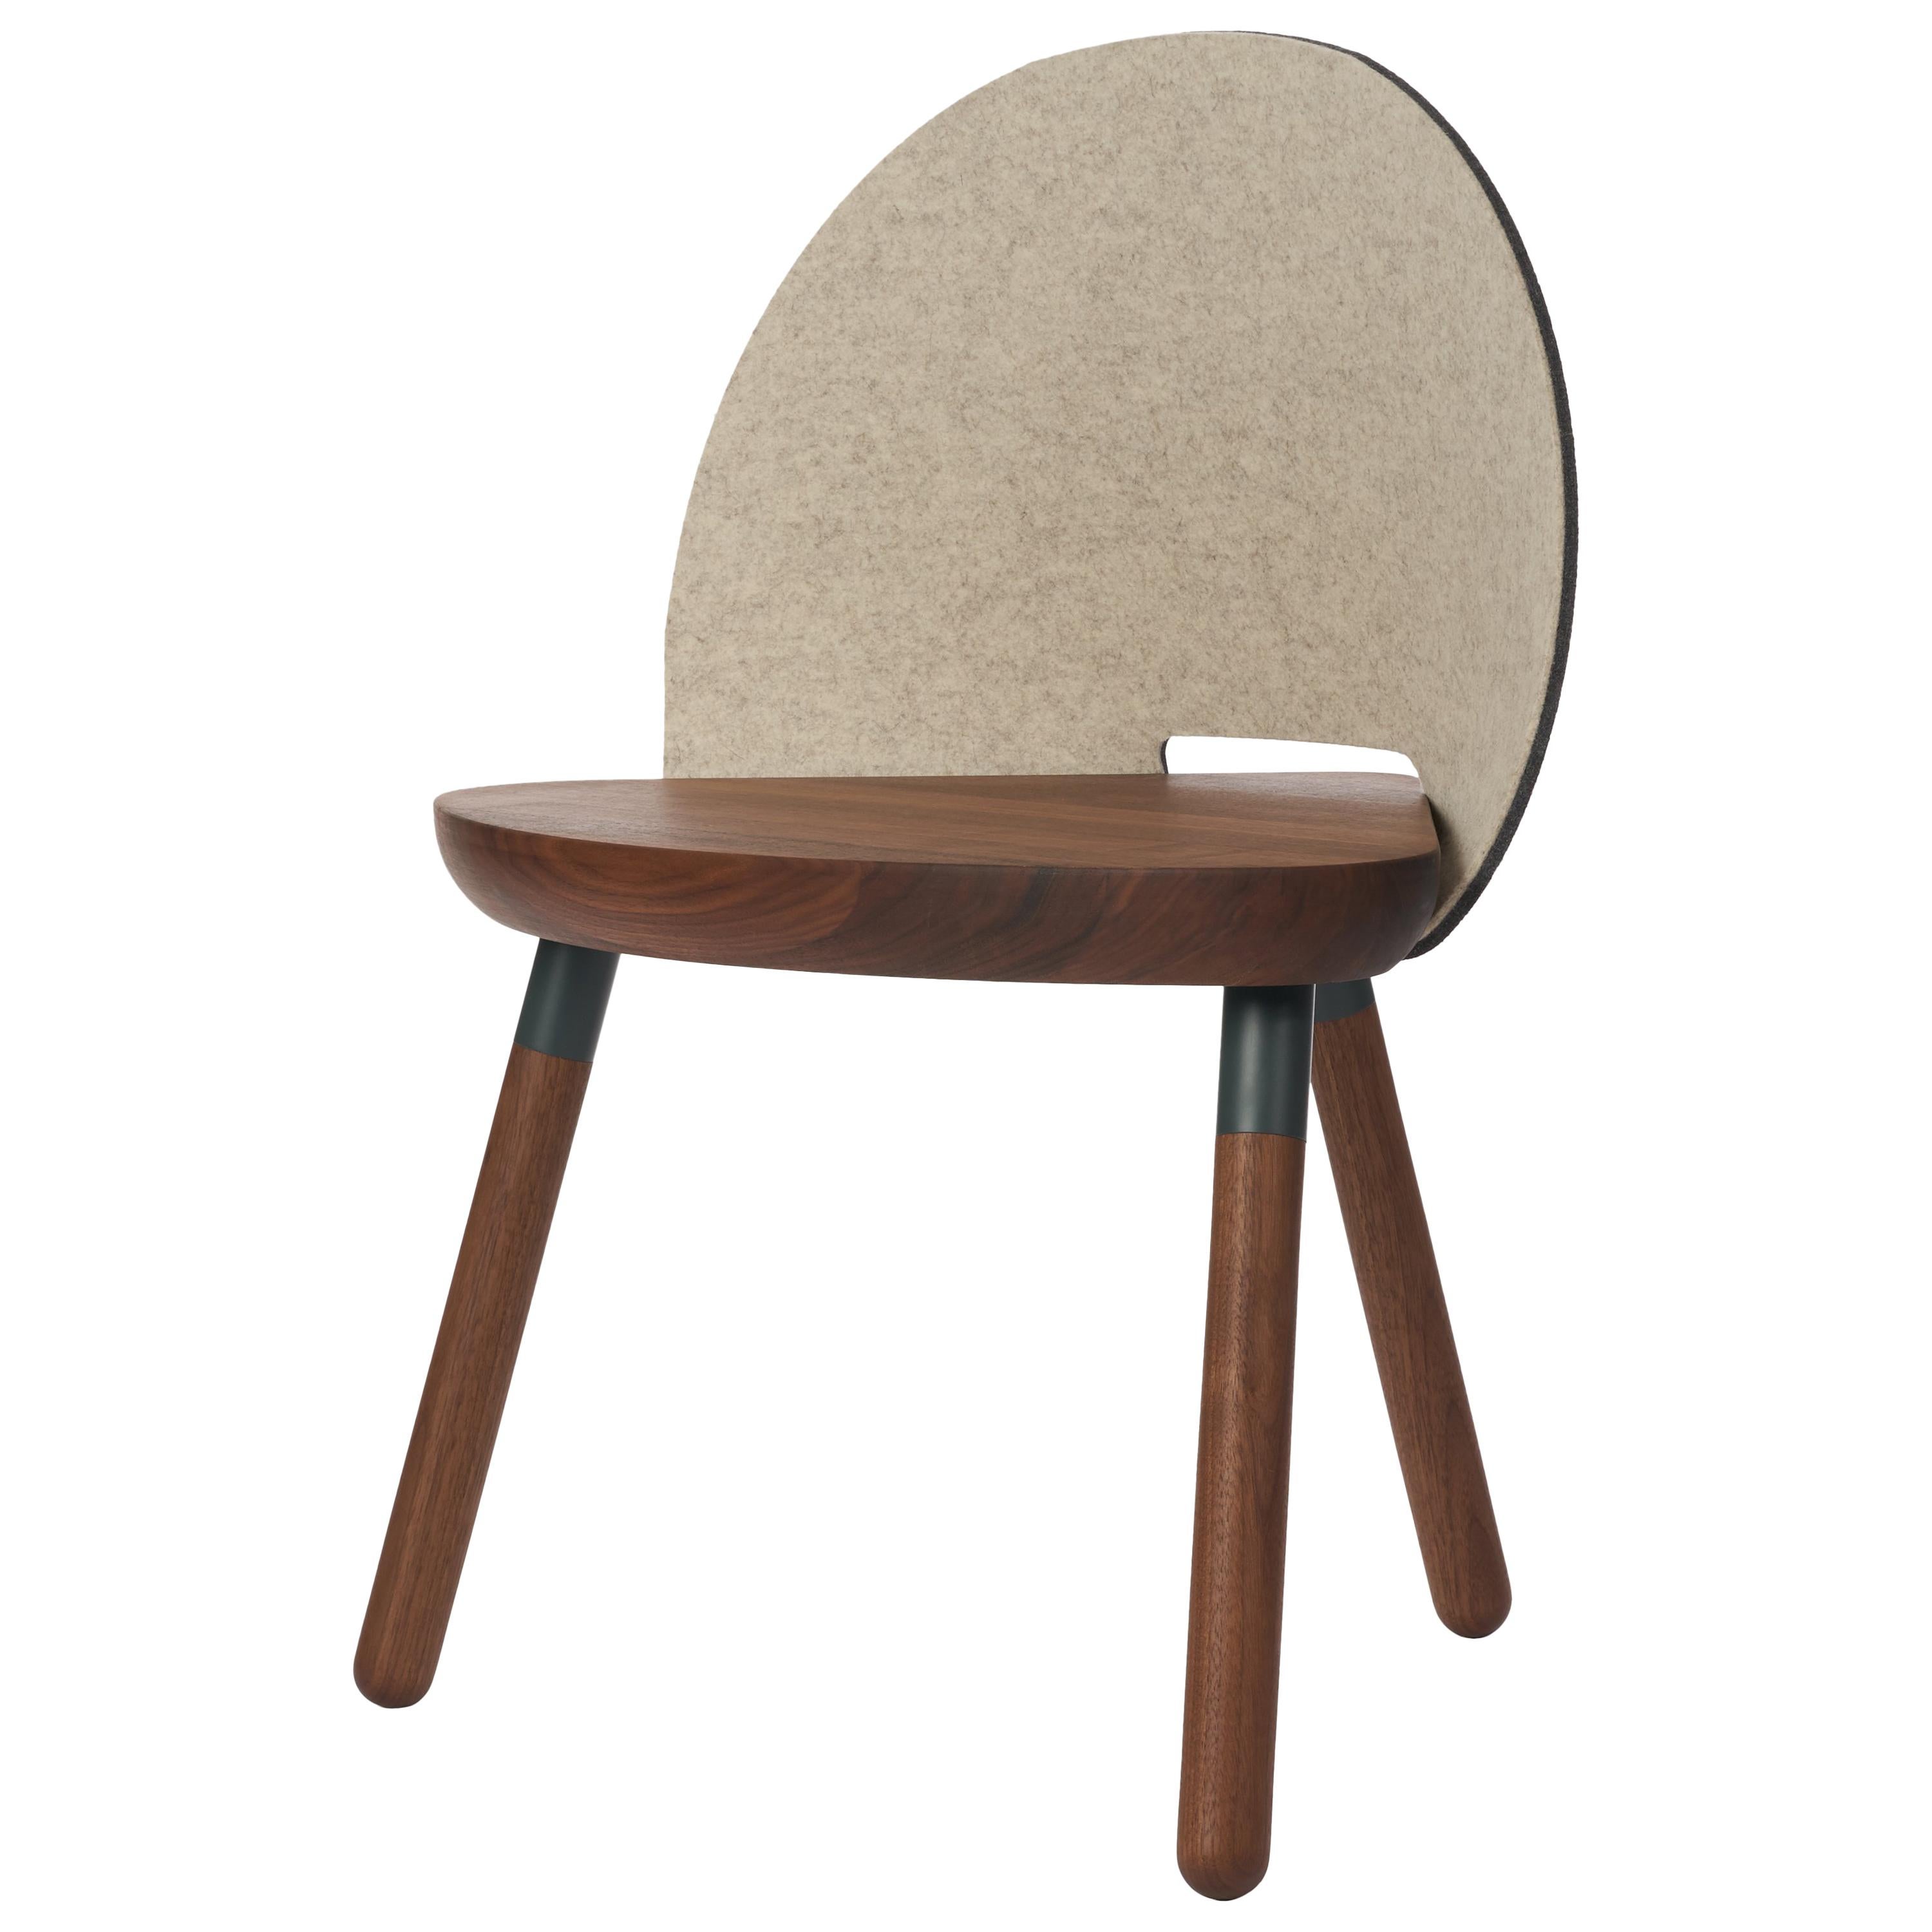 Cinch Chair, Melton Wool, Wood Seat and Eco-Friendly Powder Coated Steel Support For Sale